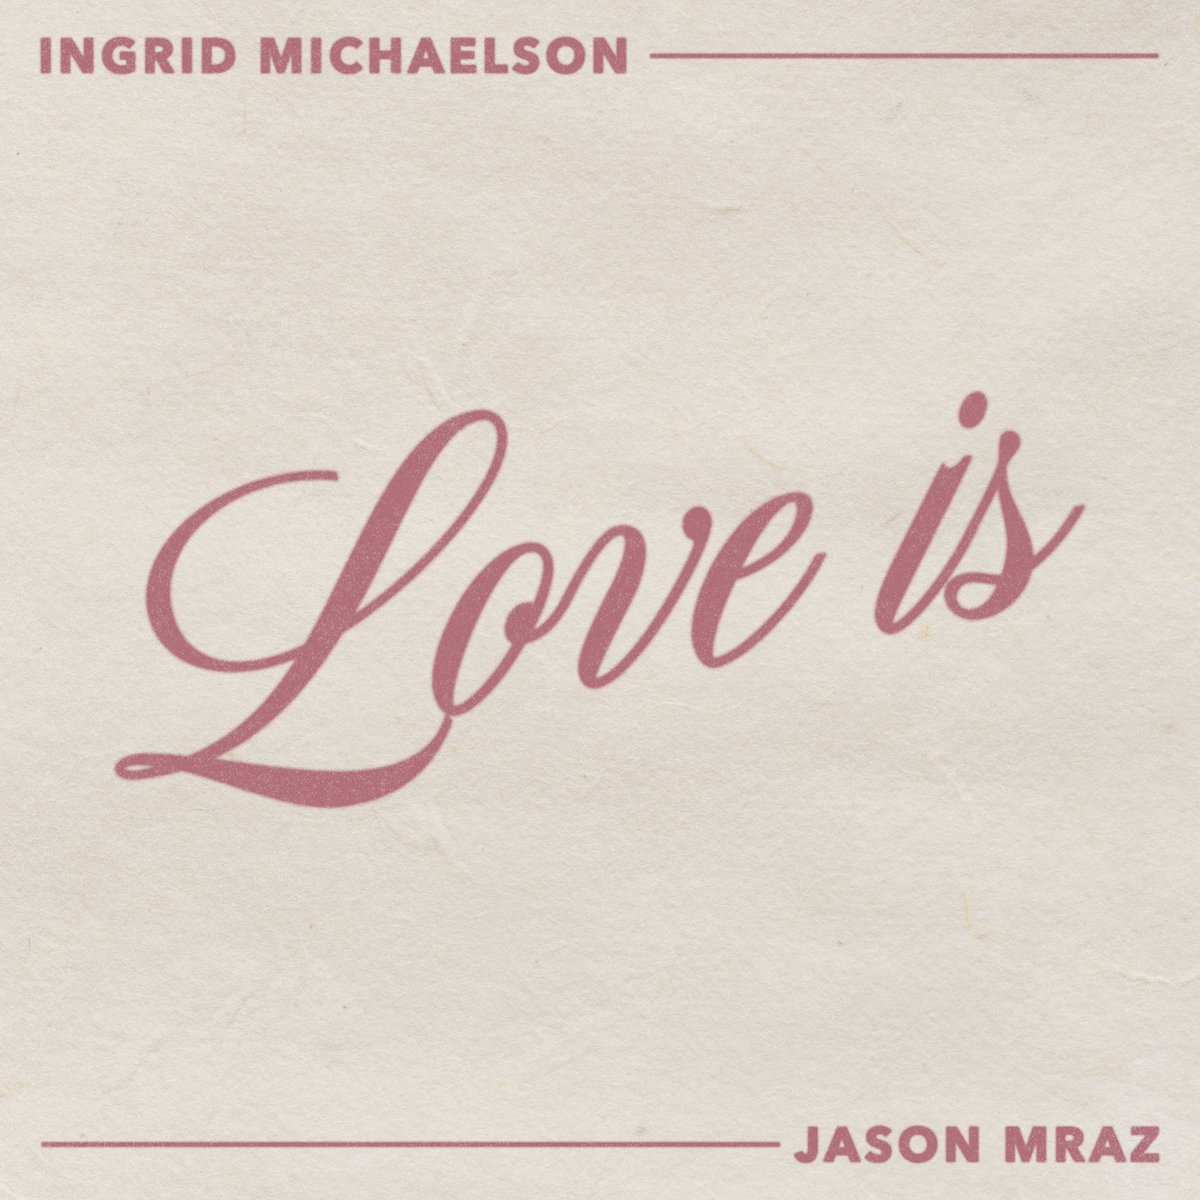 Ingrid Michaelson and Jason Mraz's new duet “Love Is” is out now! Listen wherever you like to get music onerpm.link/loveis